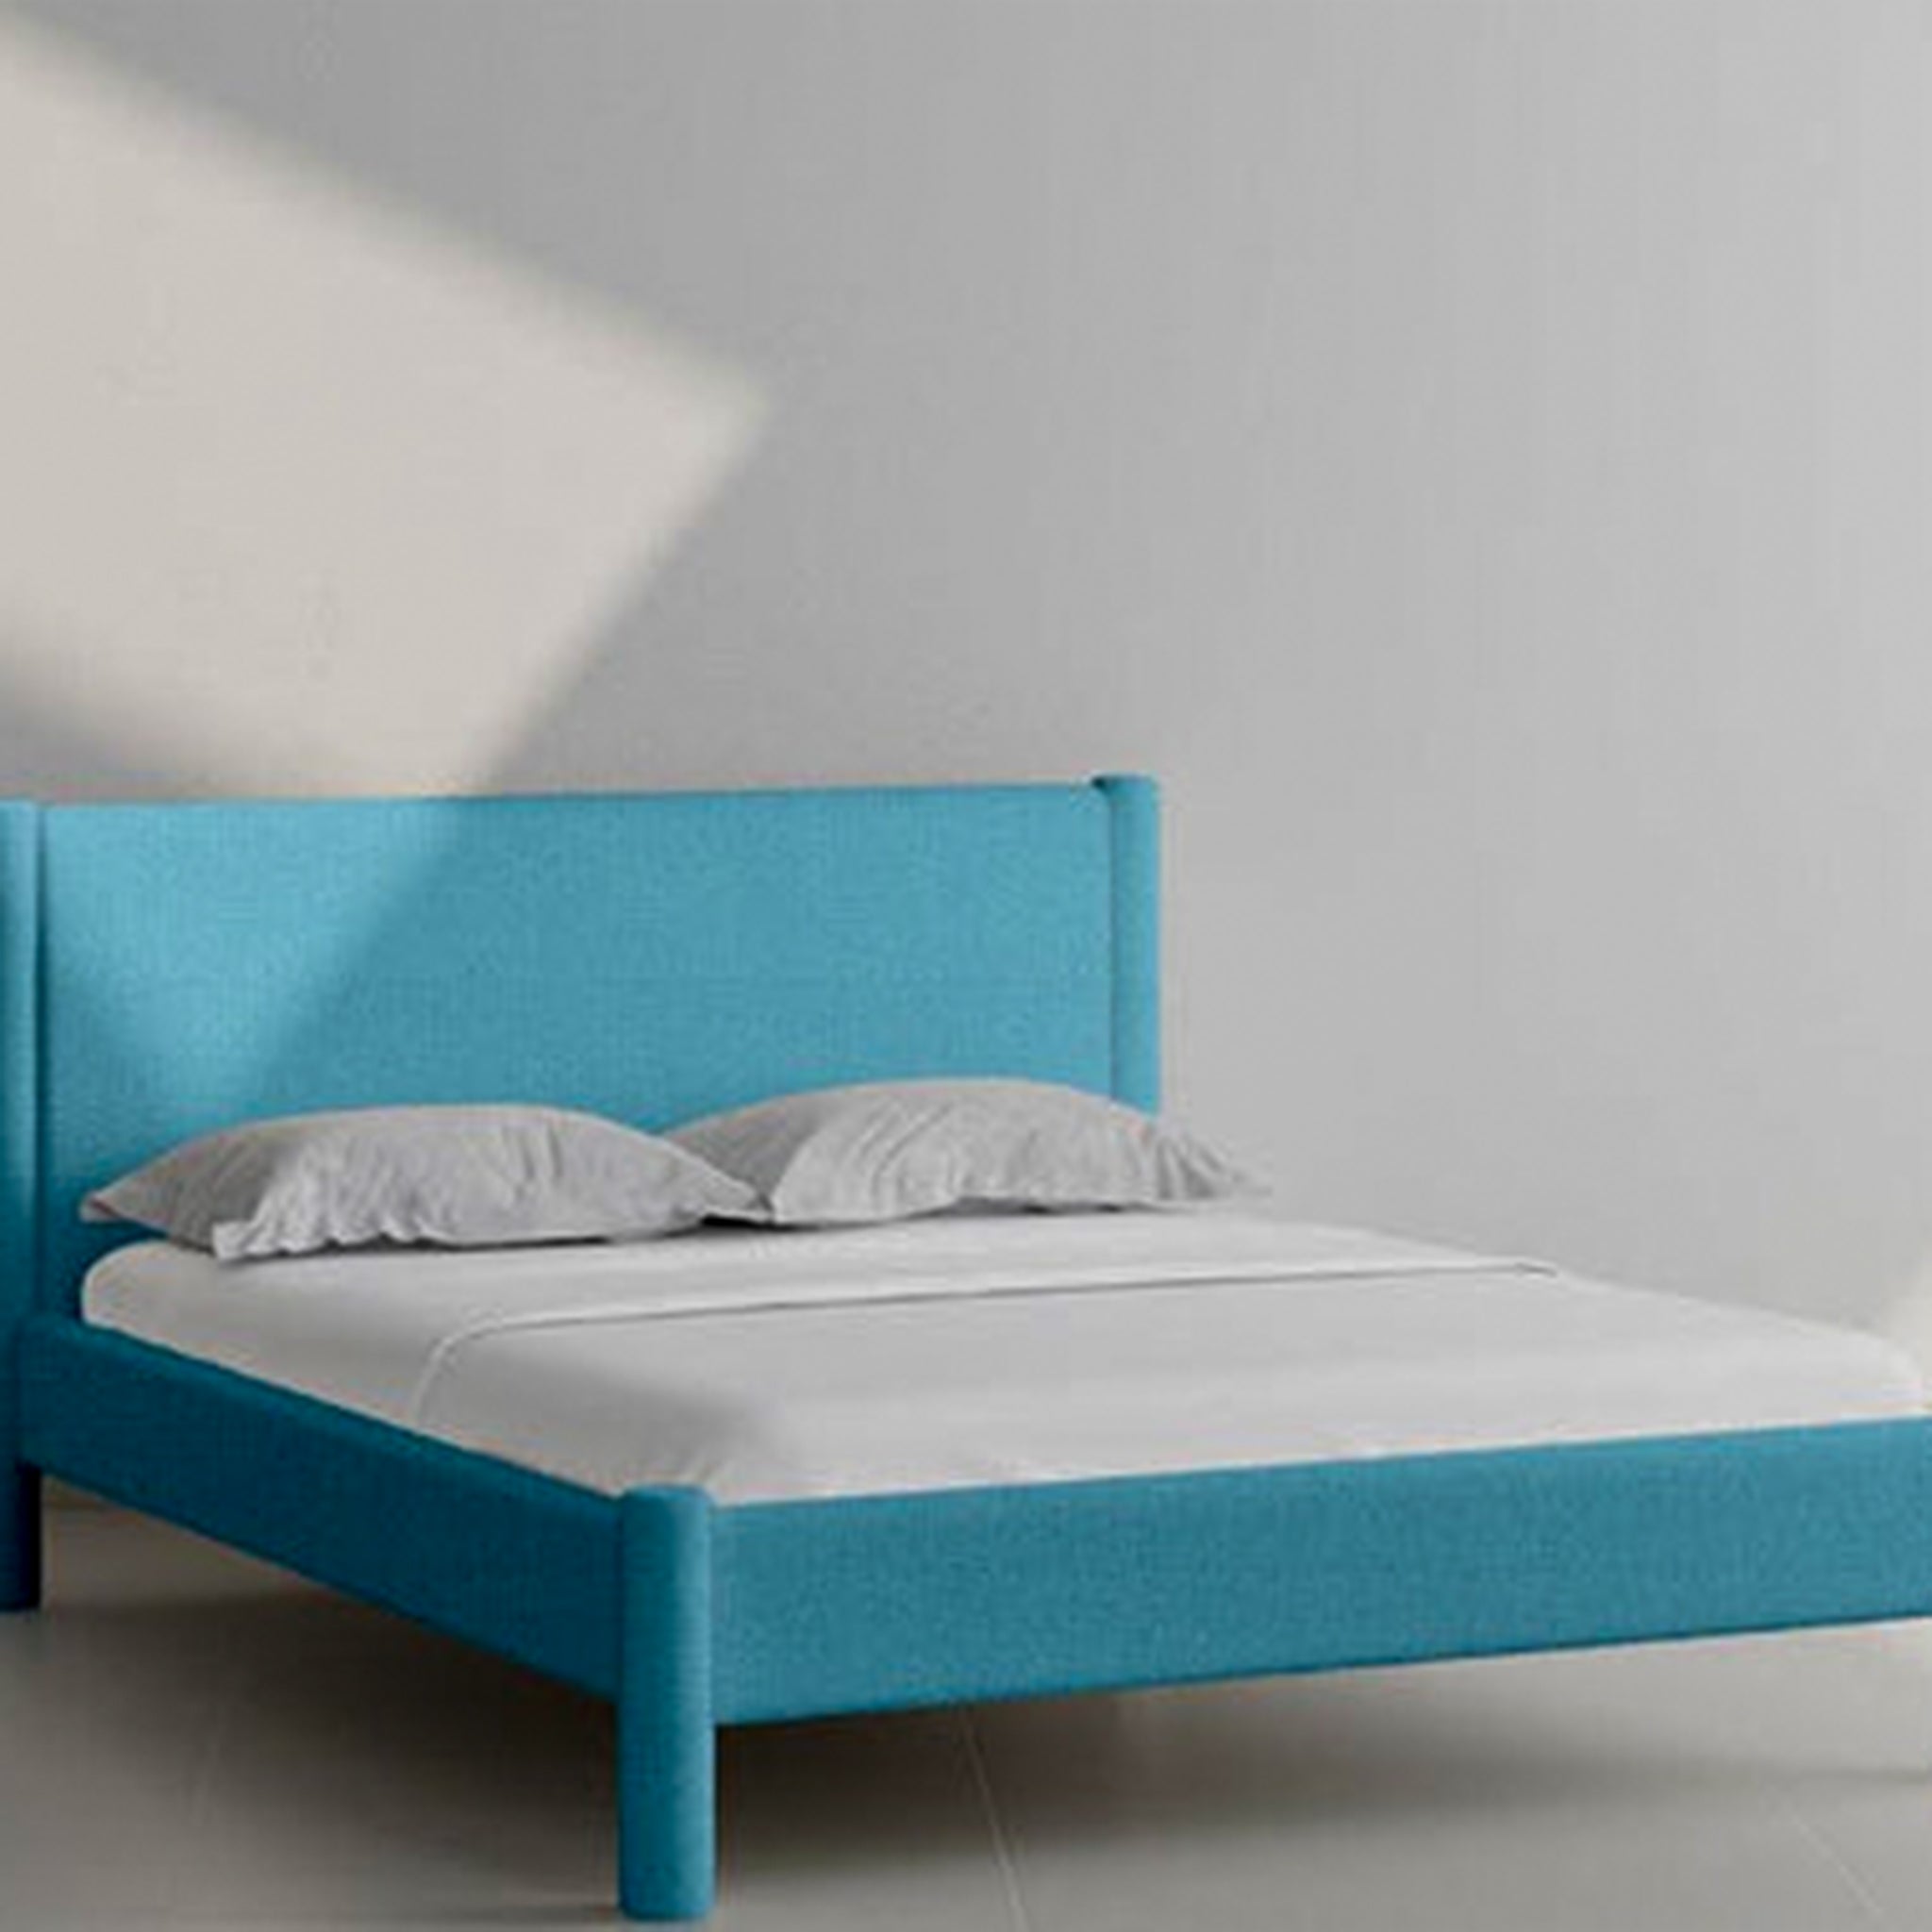 Stylish and sturdy Carrie Bed featuring a turquoise upholstered headboard.